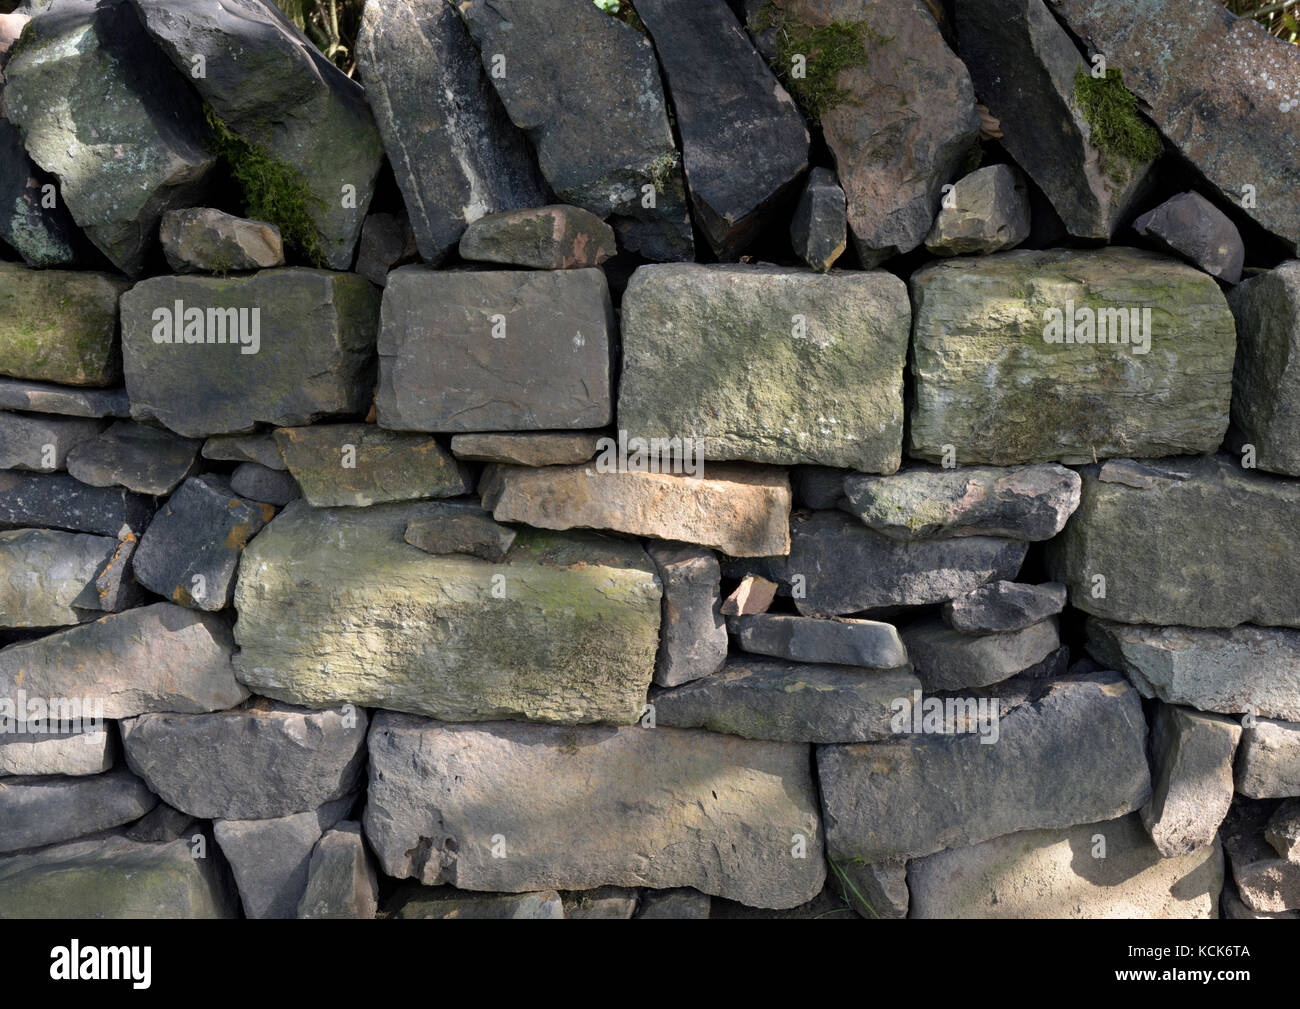 Dry stone wall with dappled sunlight in burrs country park bury lancashire uk Stock Photo